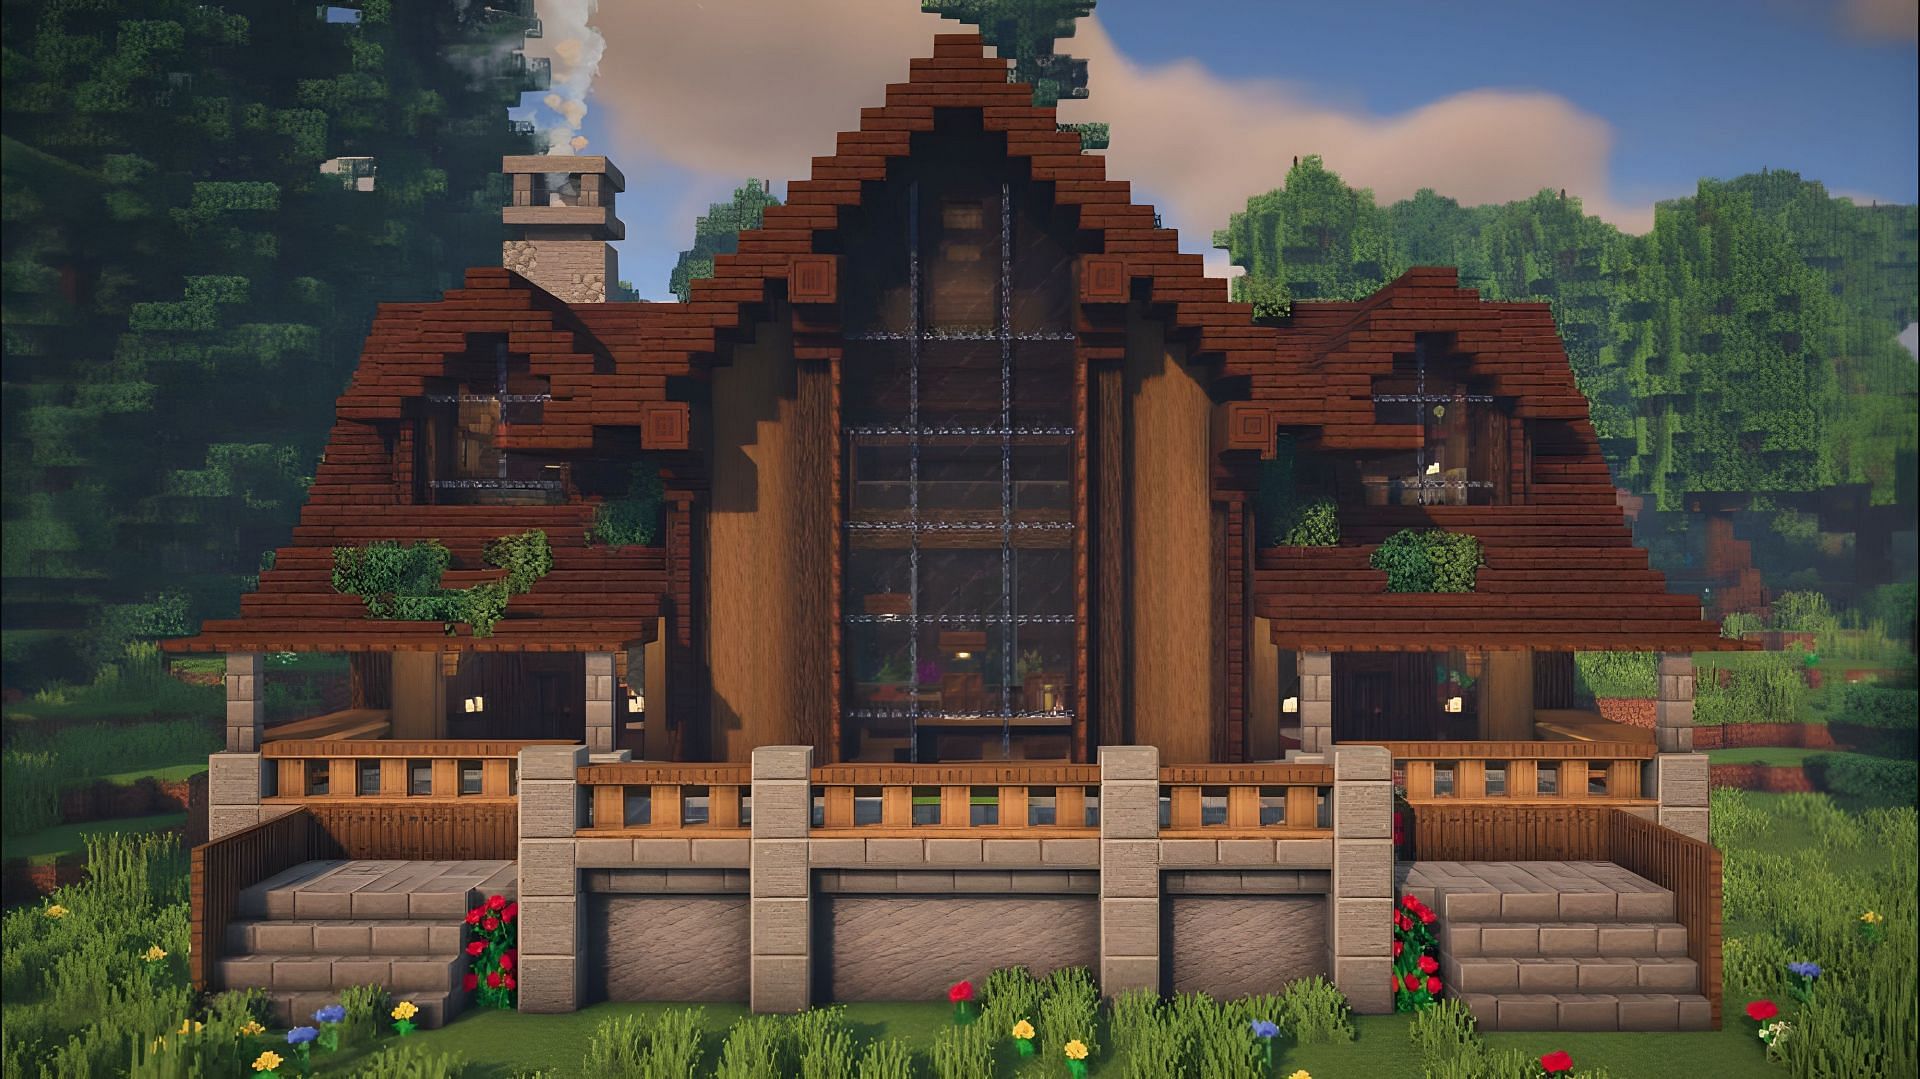 Cabins are fantastic home designs in Minecraft (Image via Youtube/Lex The Builder)